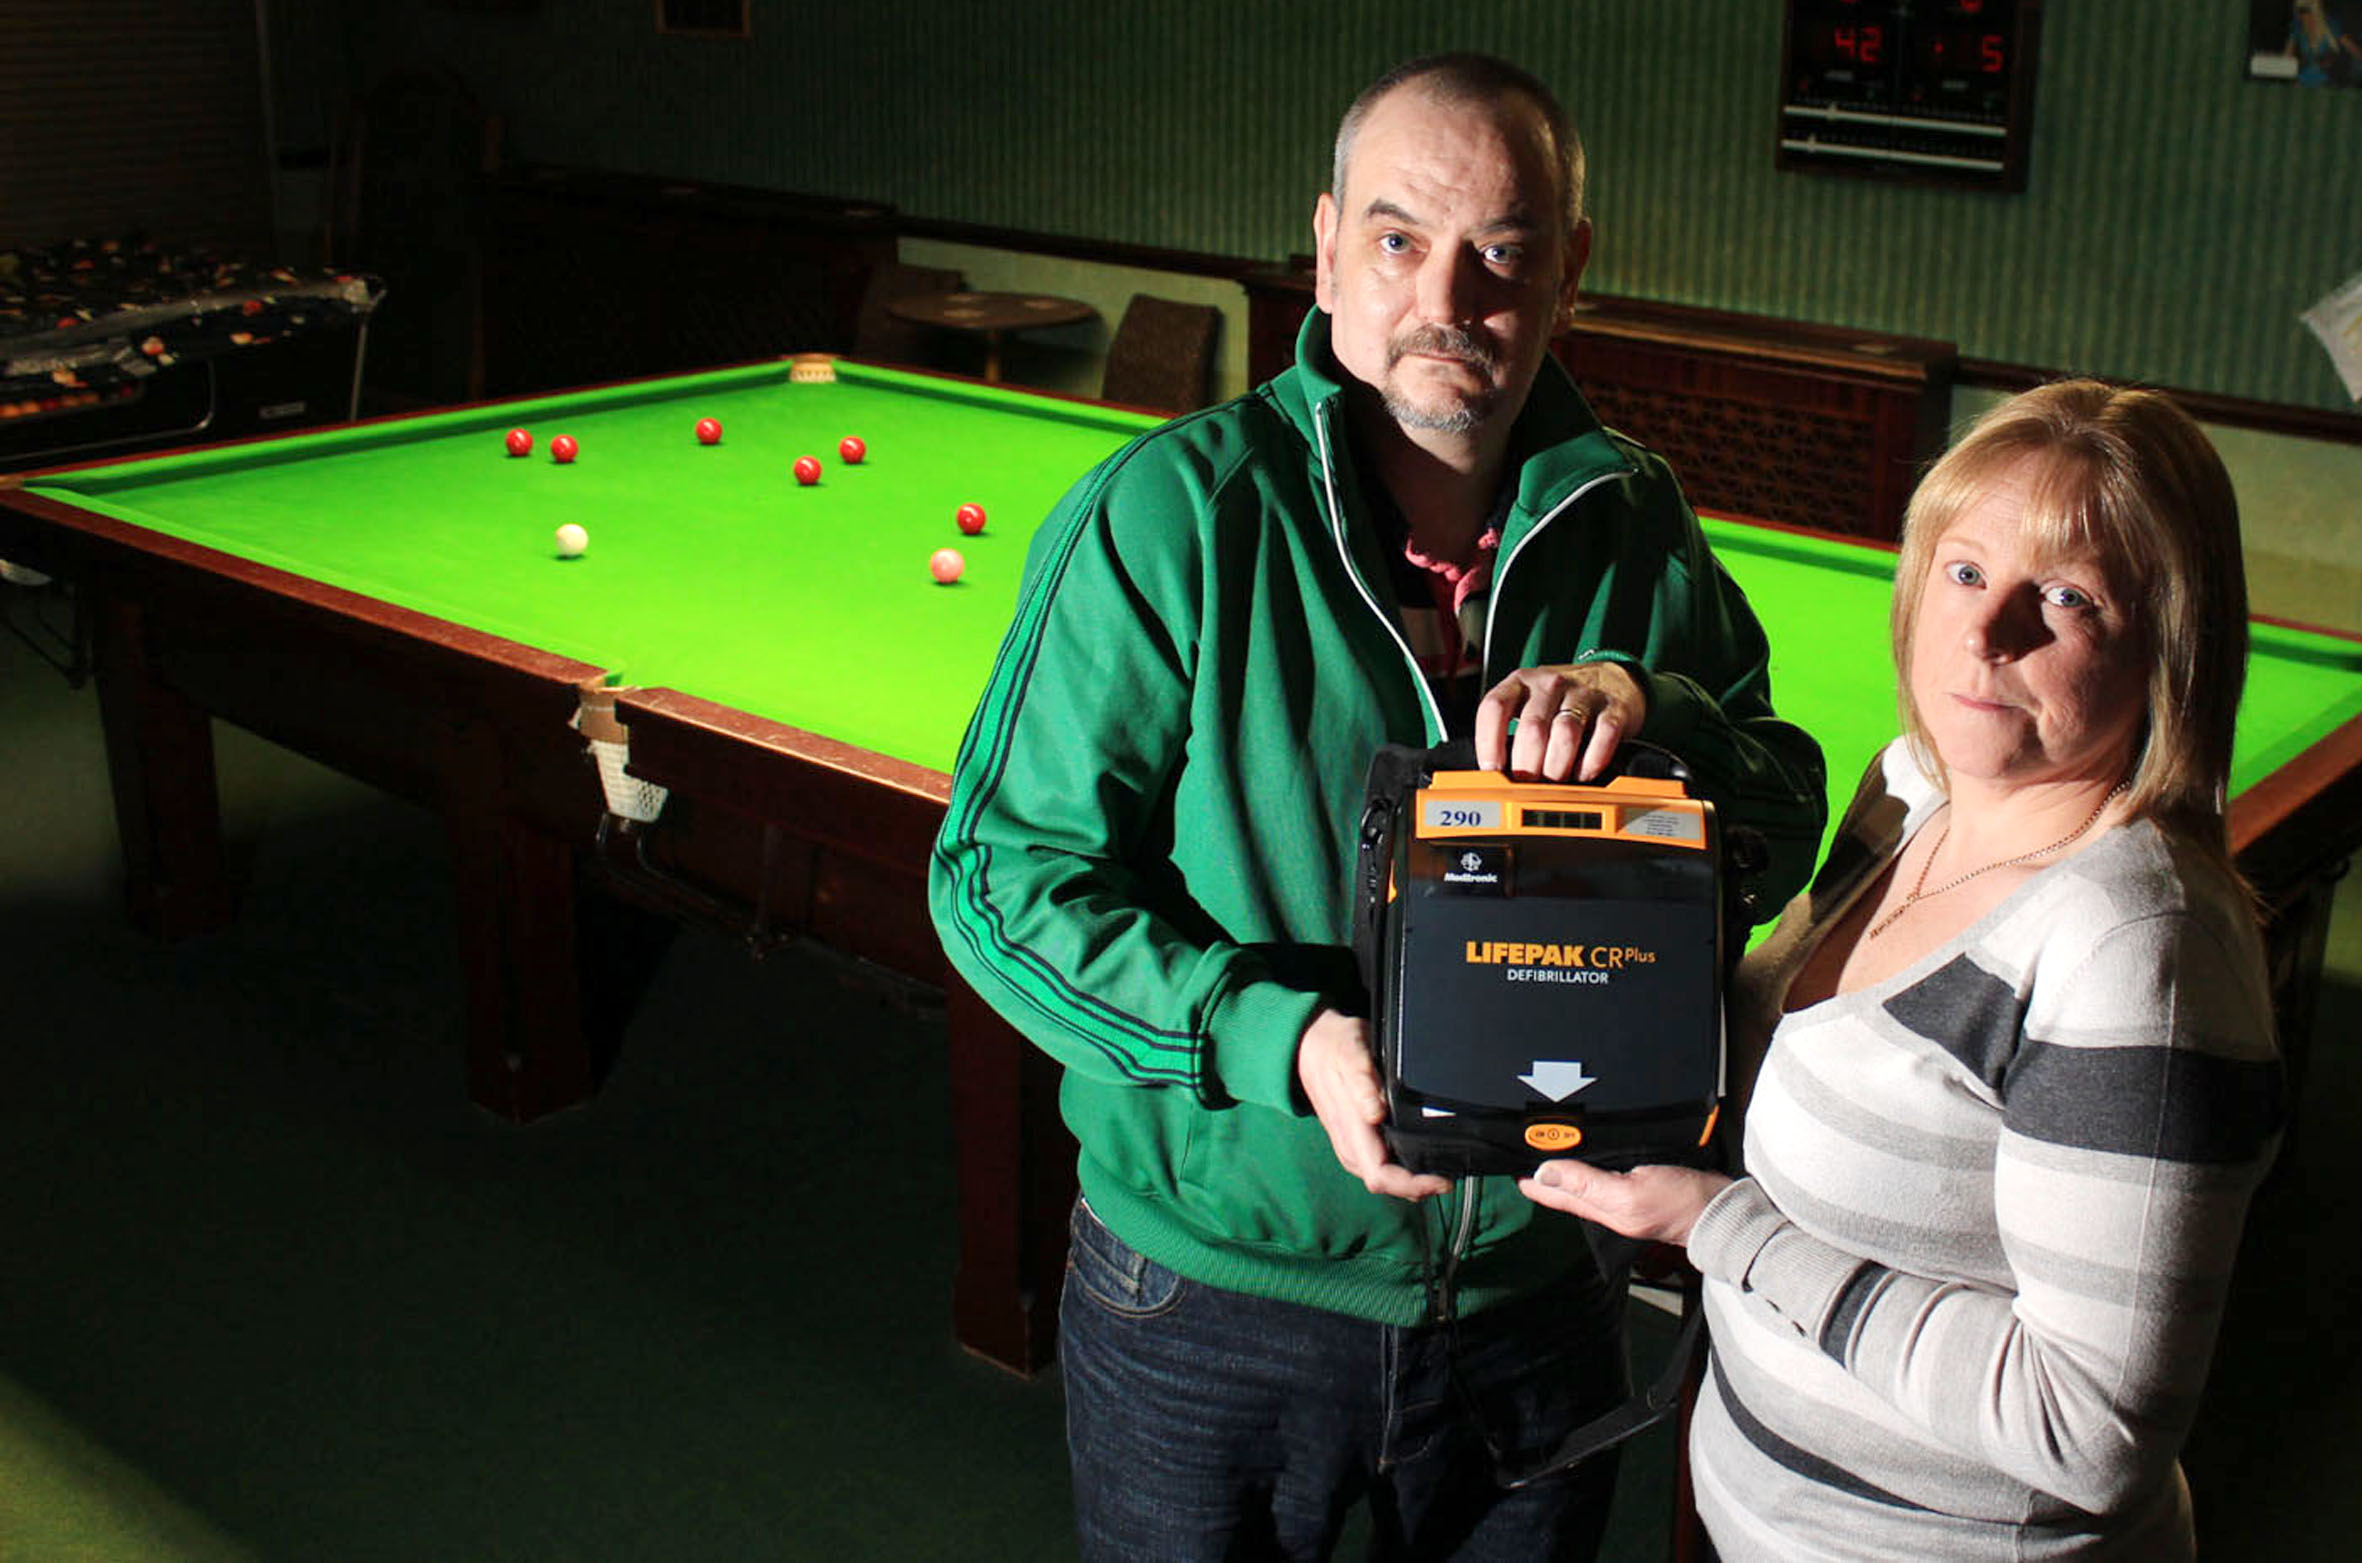 Club staff and customers save snooker players life after he collapses during match The Bolton News